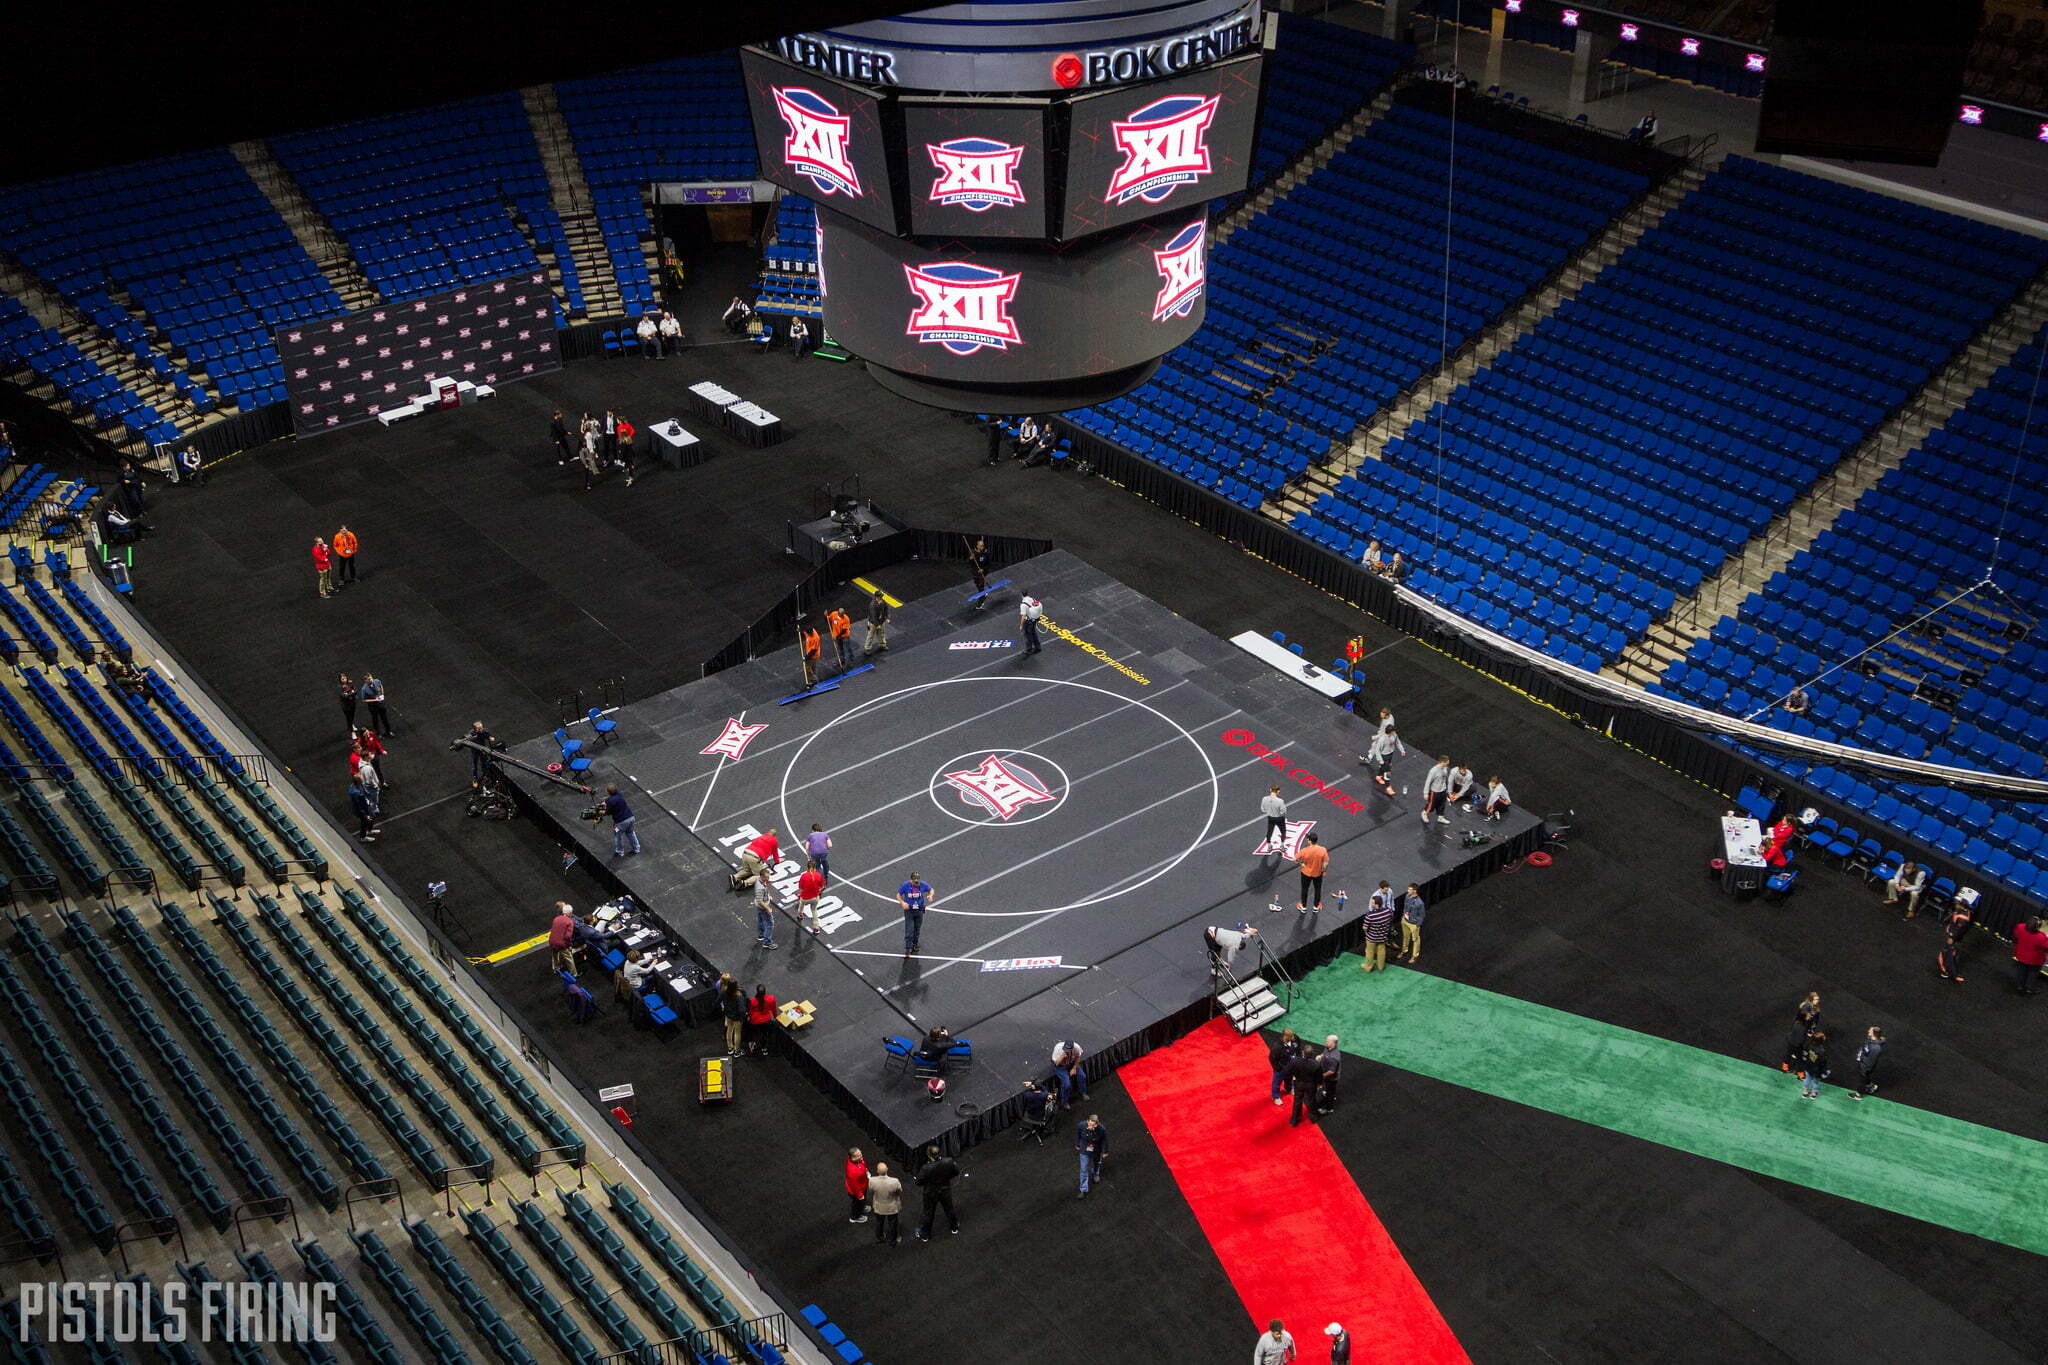 Big 12 Wrestling Tournament Schedule and Storylines to Follow for OSU